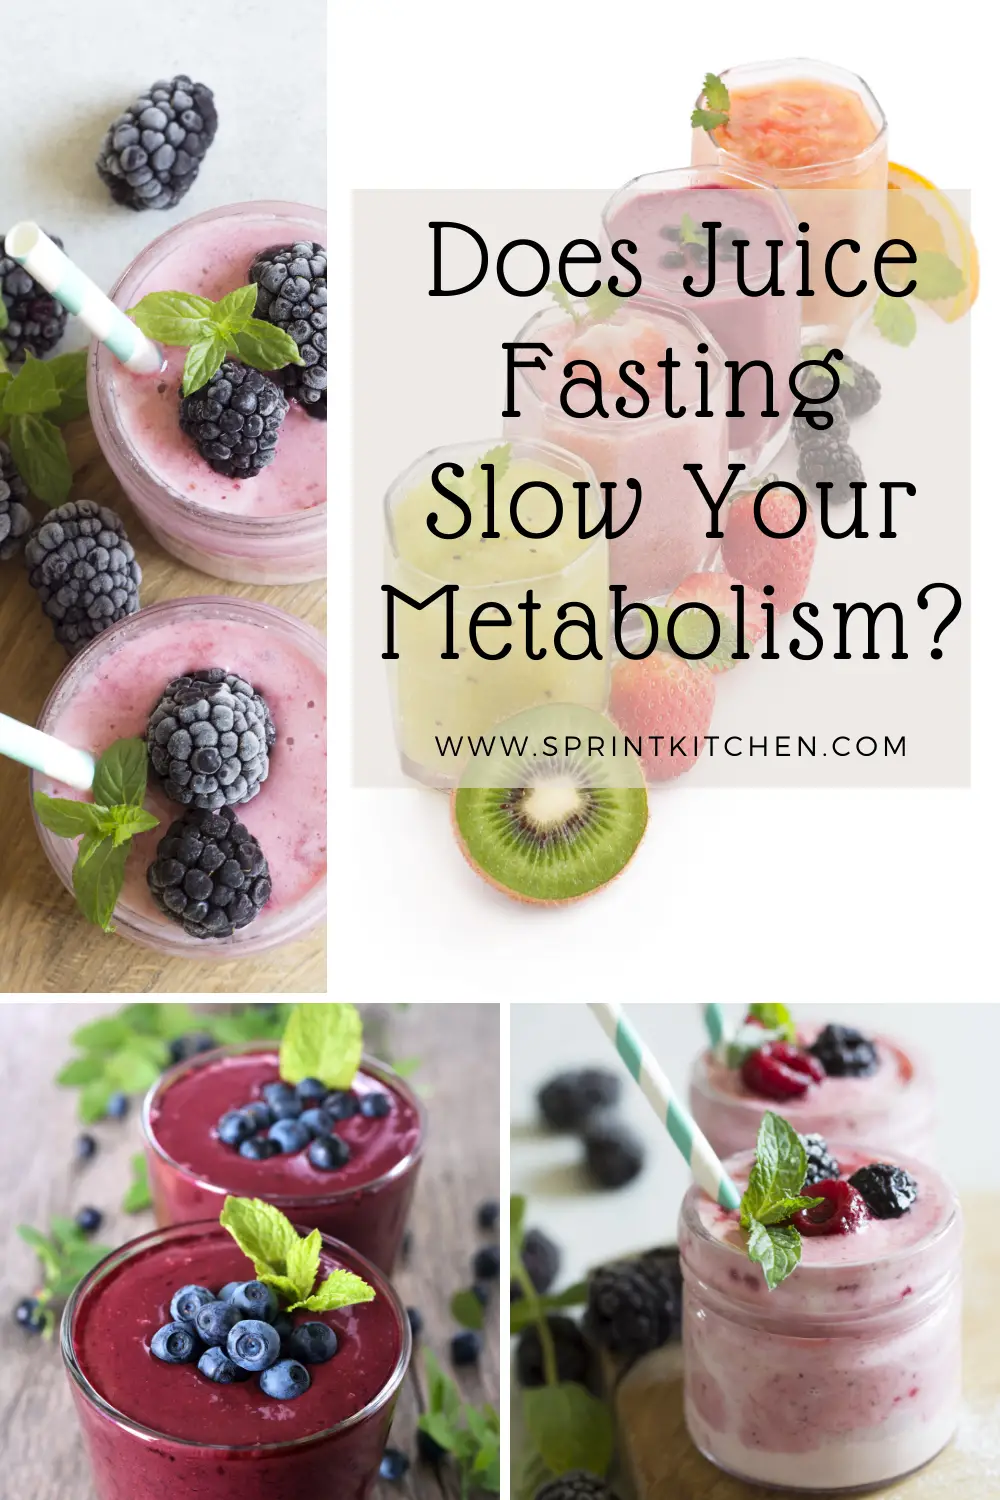 Juice Fasting Slow Your Metabolism in 2021